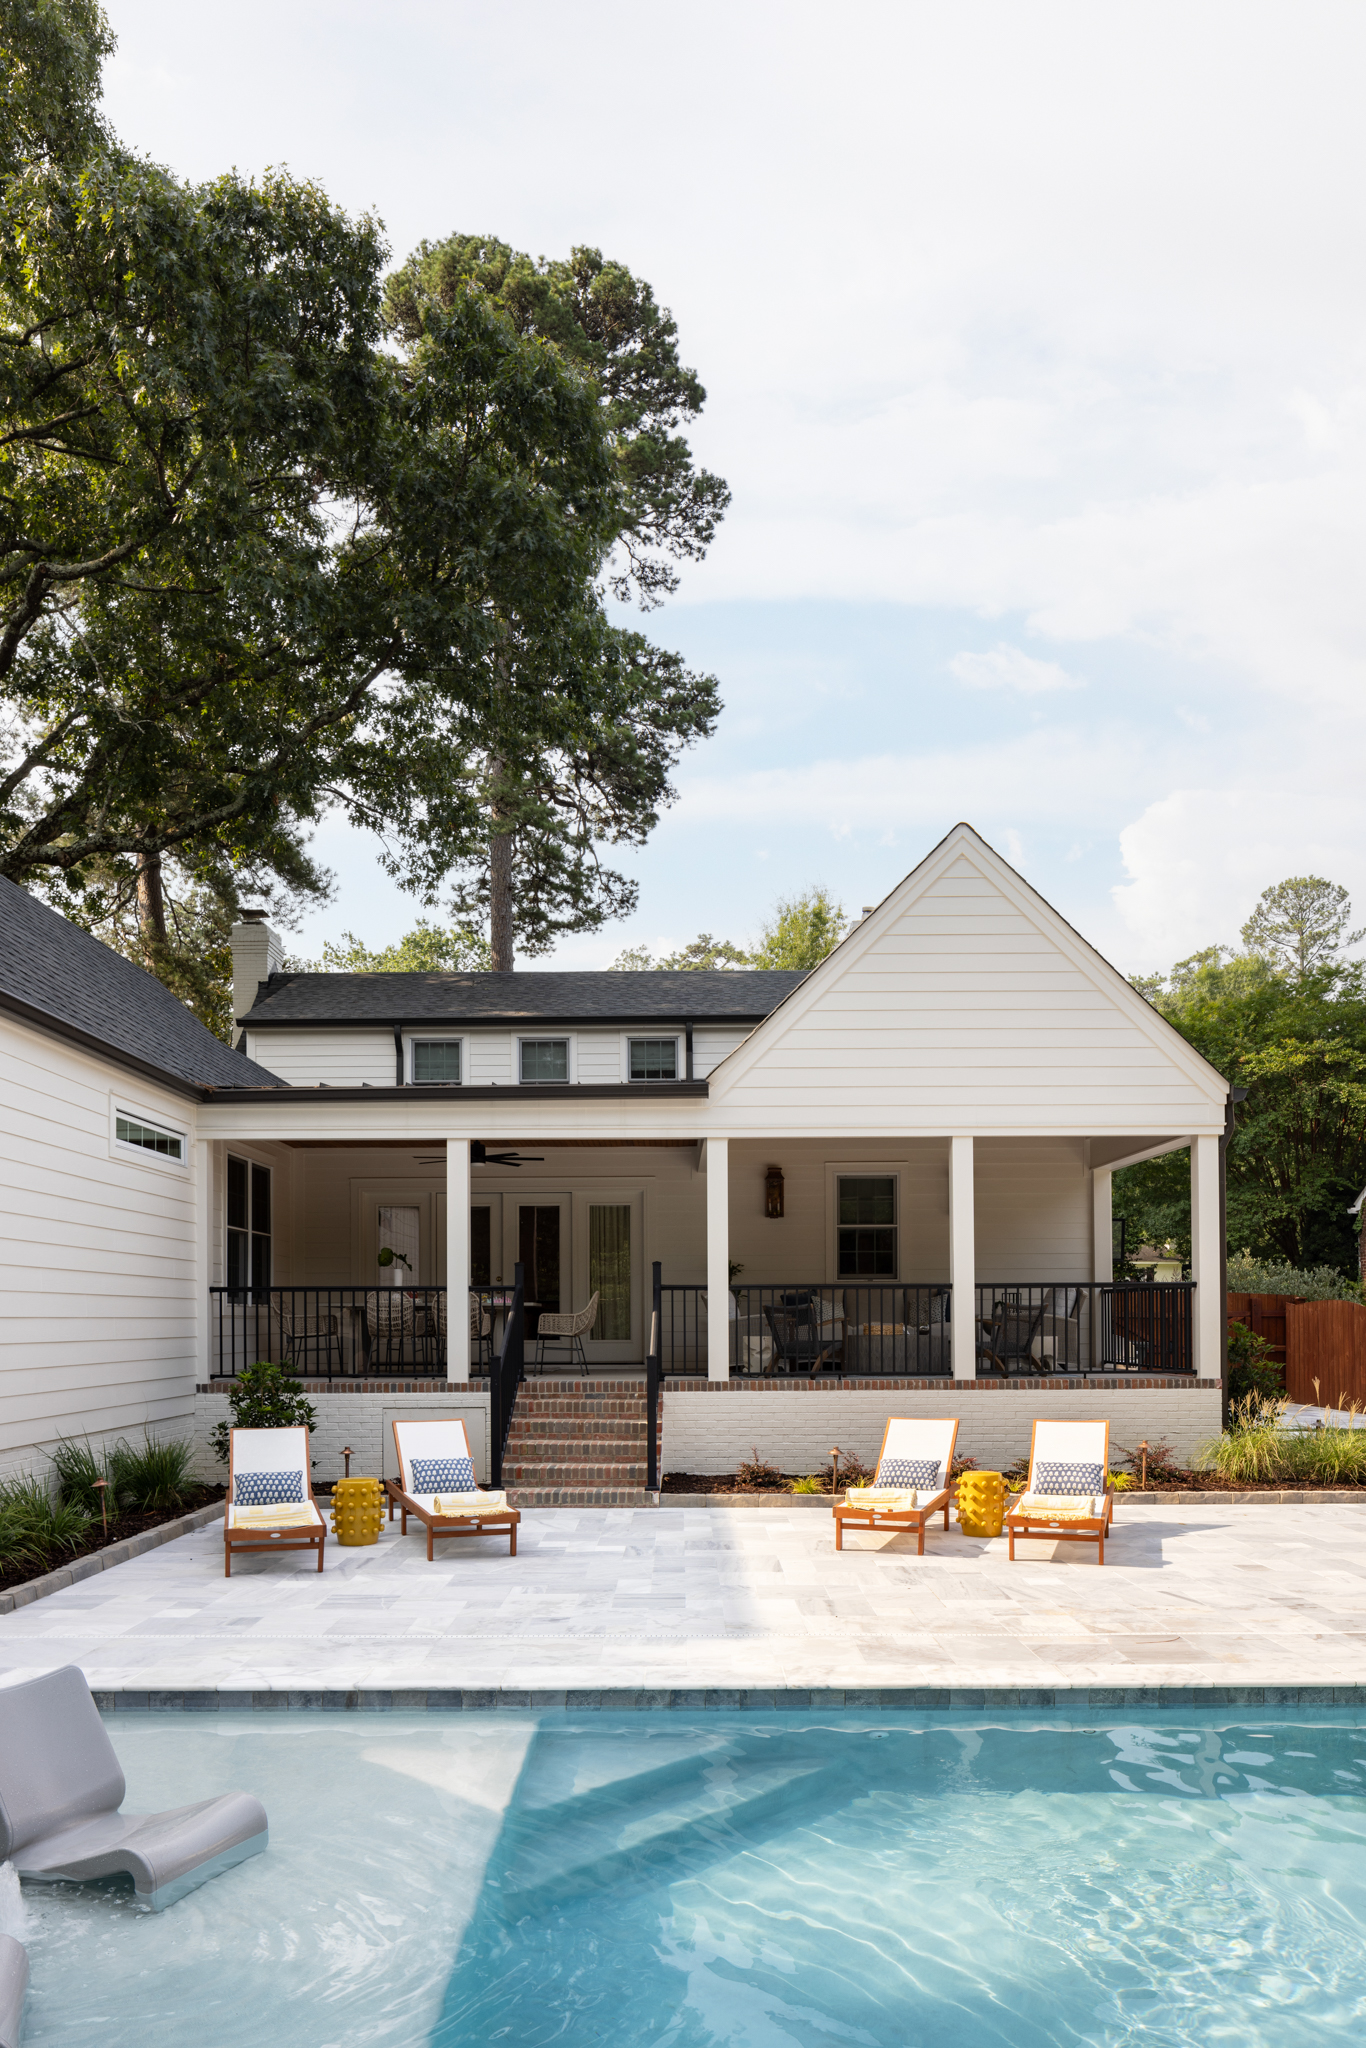 One of the most dramatic additions to the property is the sleek backyard pool. Because of the small space, Lucie sought a change that would be proportional, wanting the pool to feel cool and tailored while not overpowering the small backyard. 